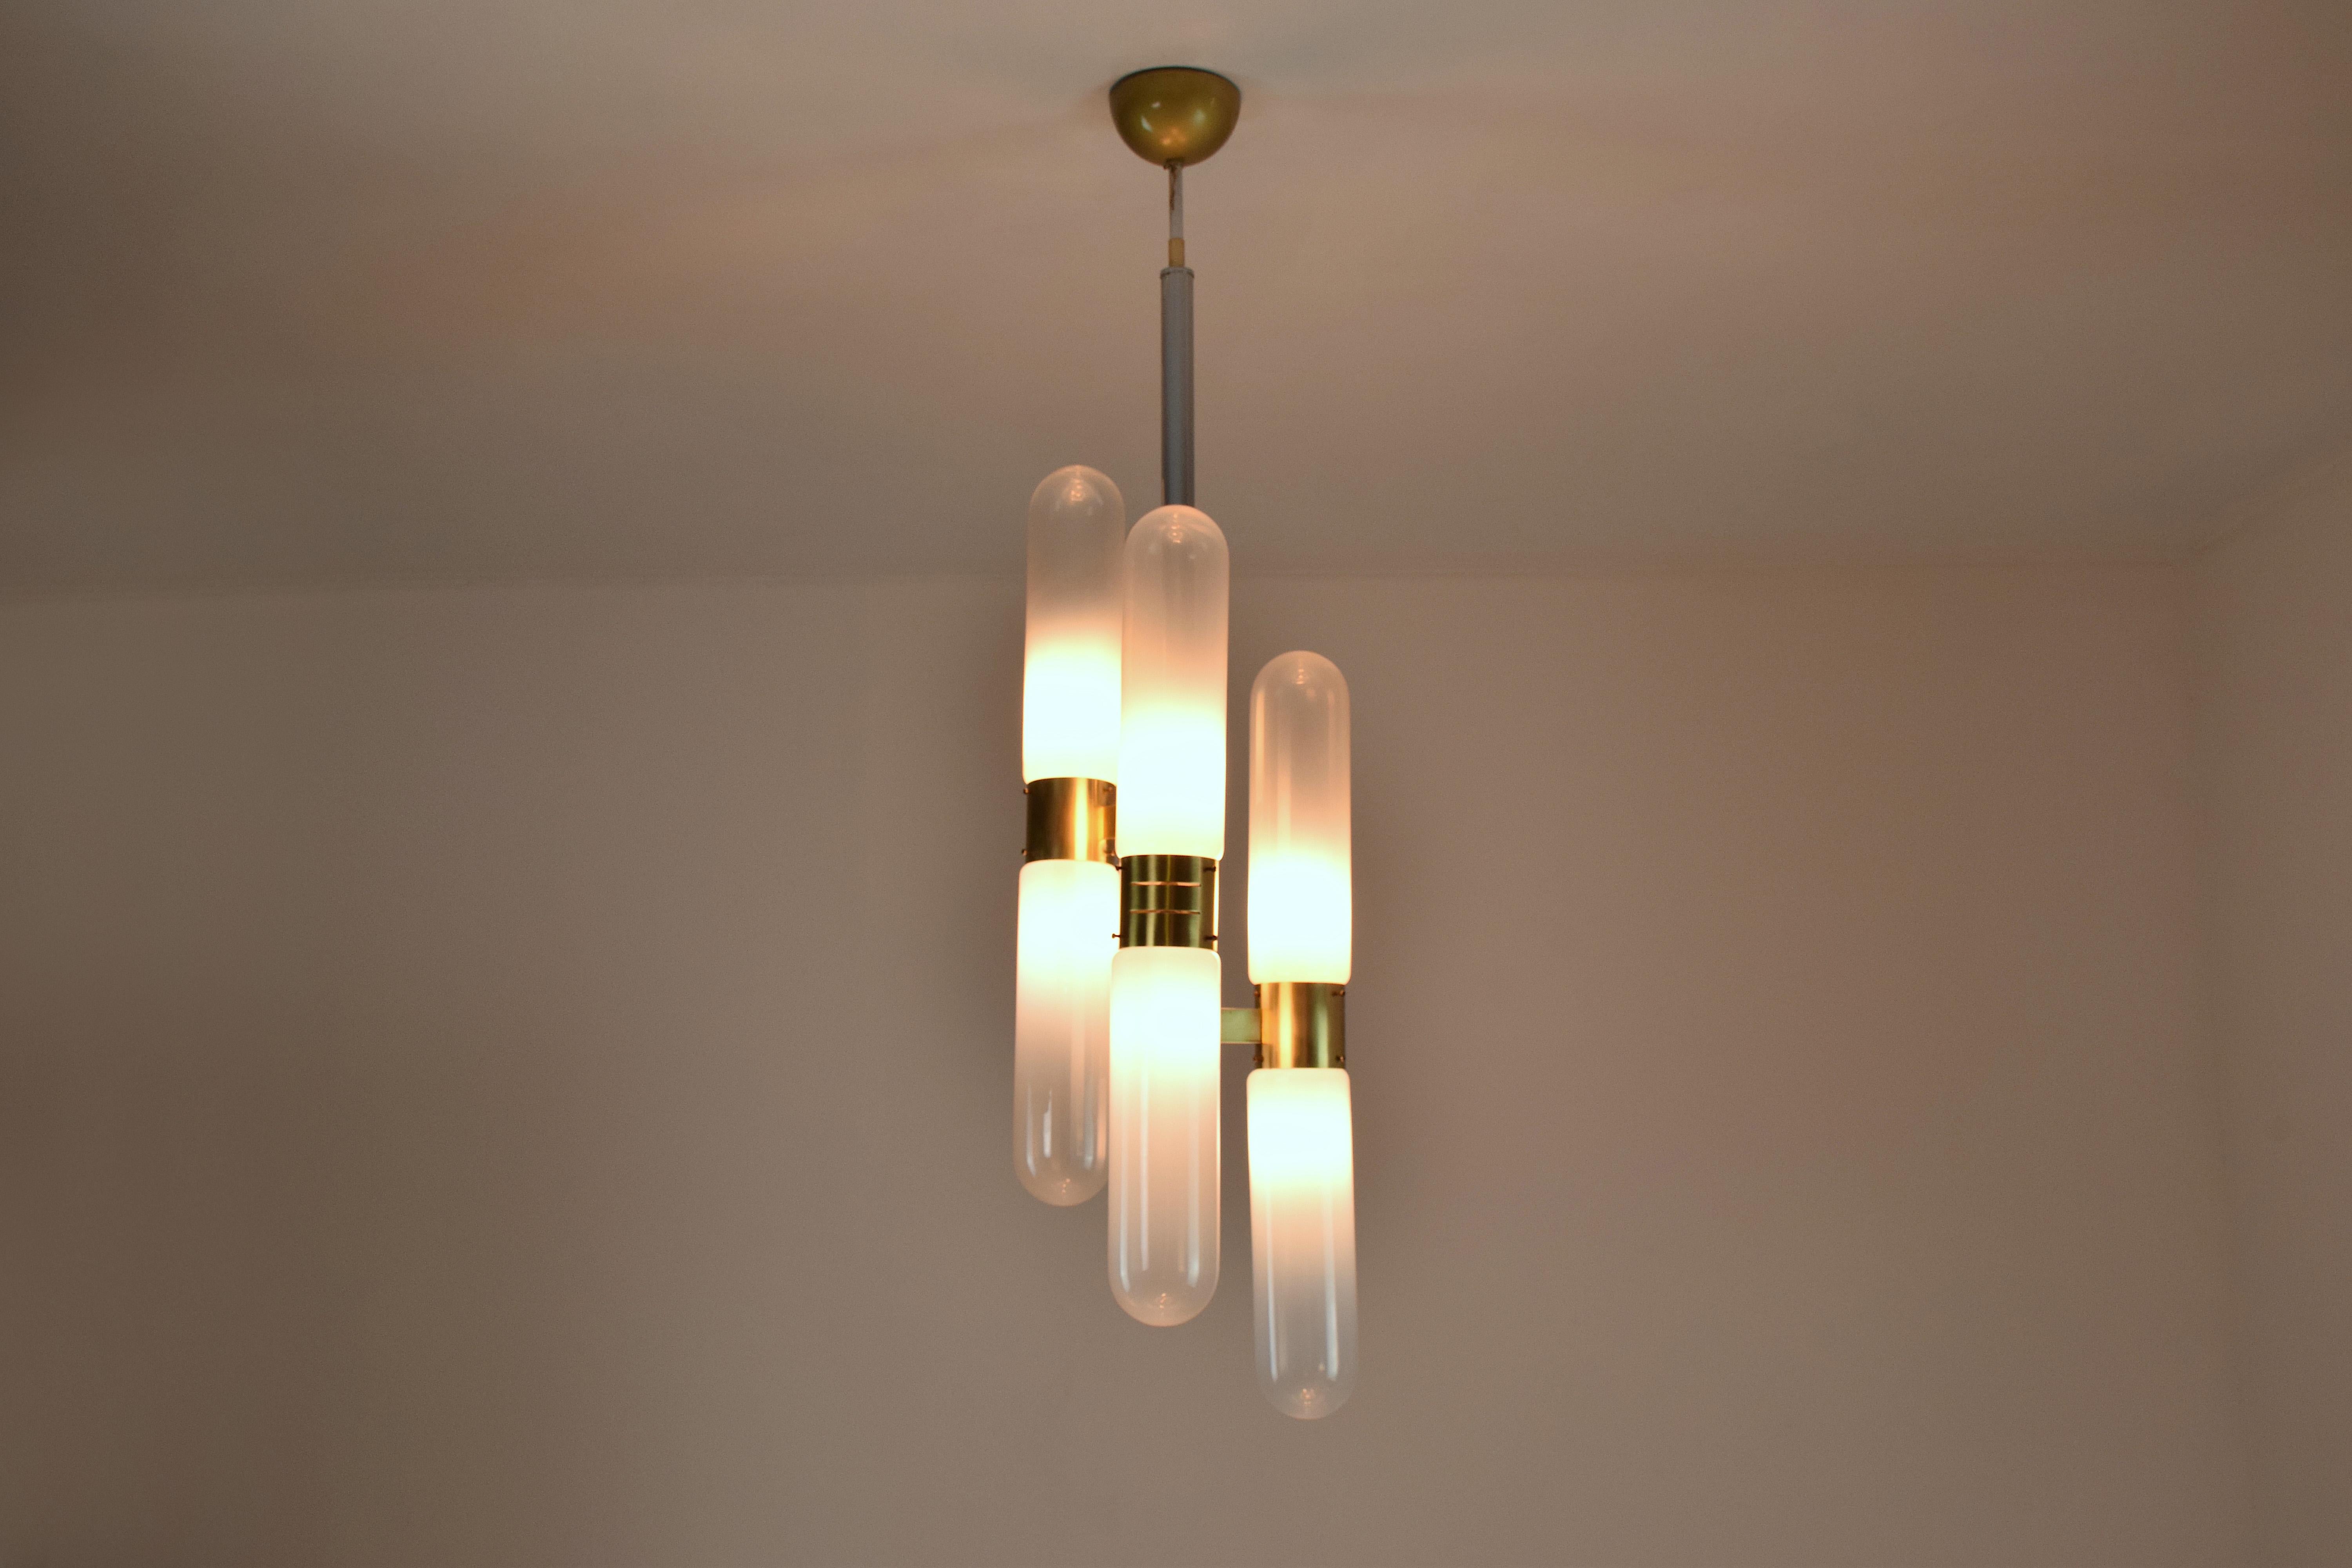 A Mid-Century Modern 1960's collectible light pendant/chandelier designed by notable Italian designer Carlo Nason for Mazzega who was born into a family of expert glassmakers.
The three-shade piece is designed in Murano opaline blown glass and chic